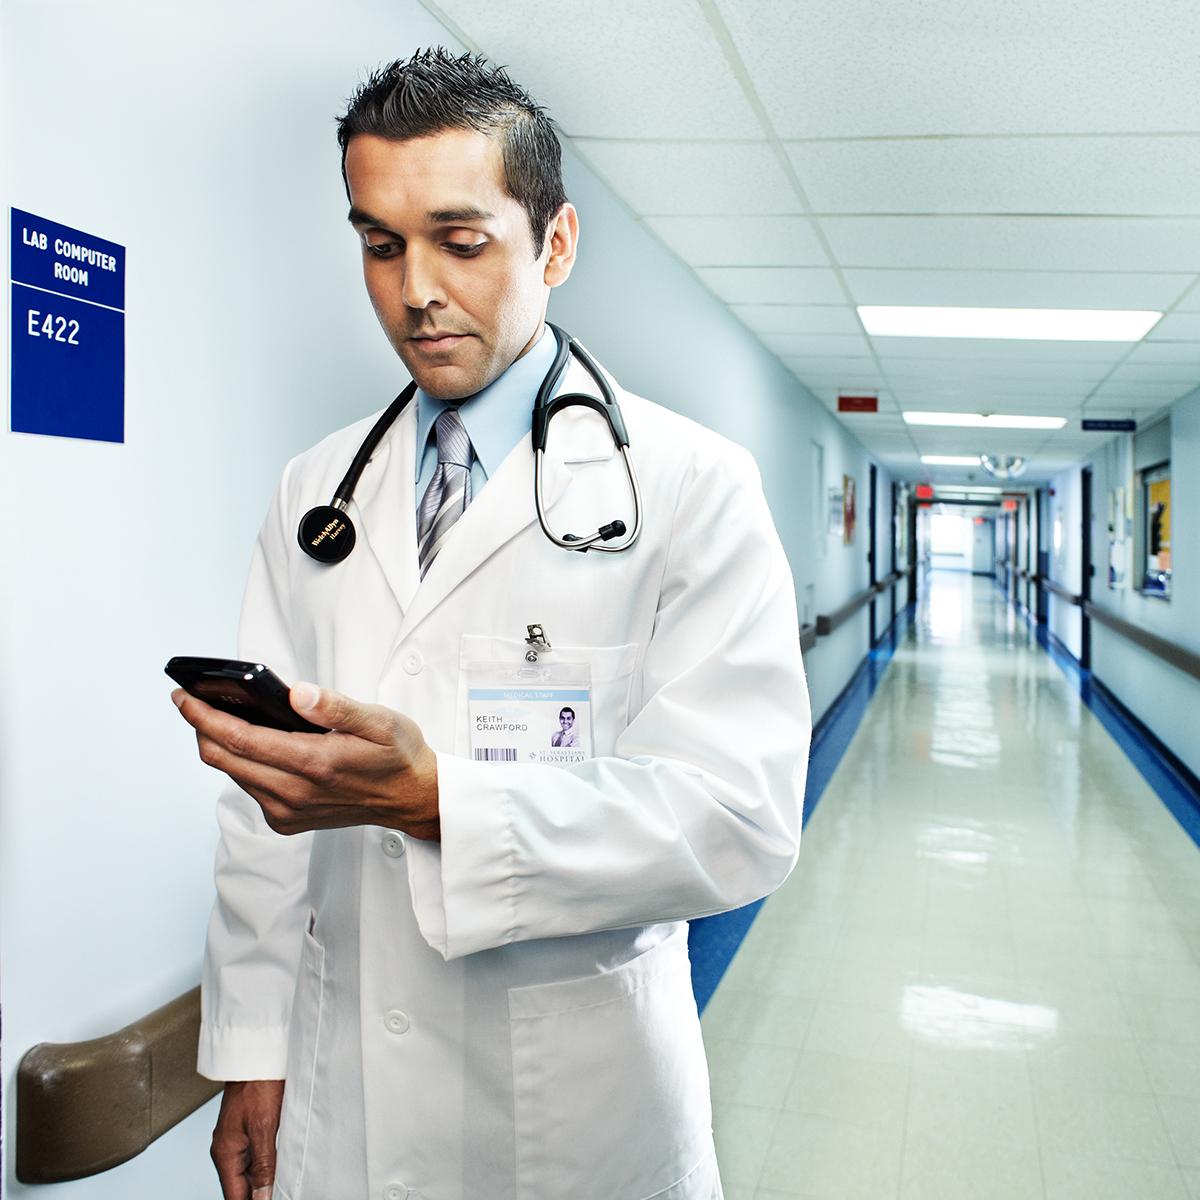 Clinician looking at smartphone in hospital hallway